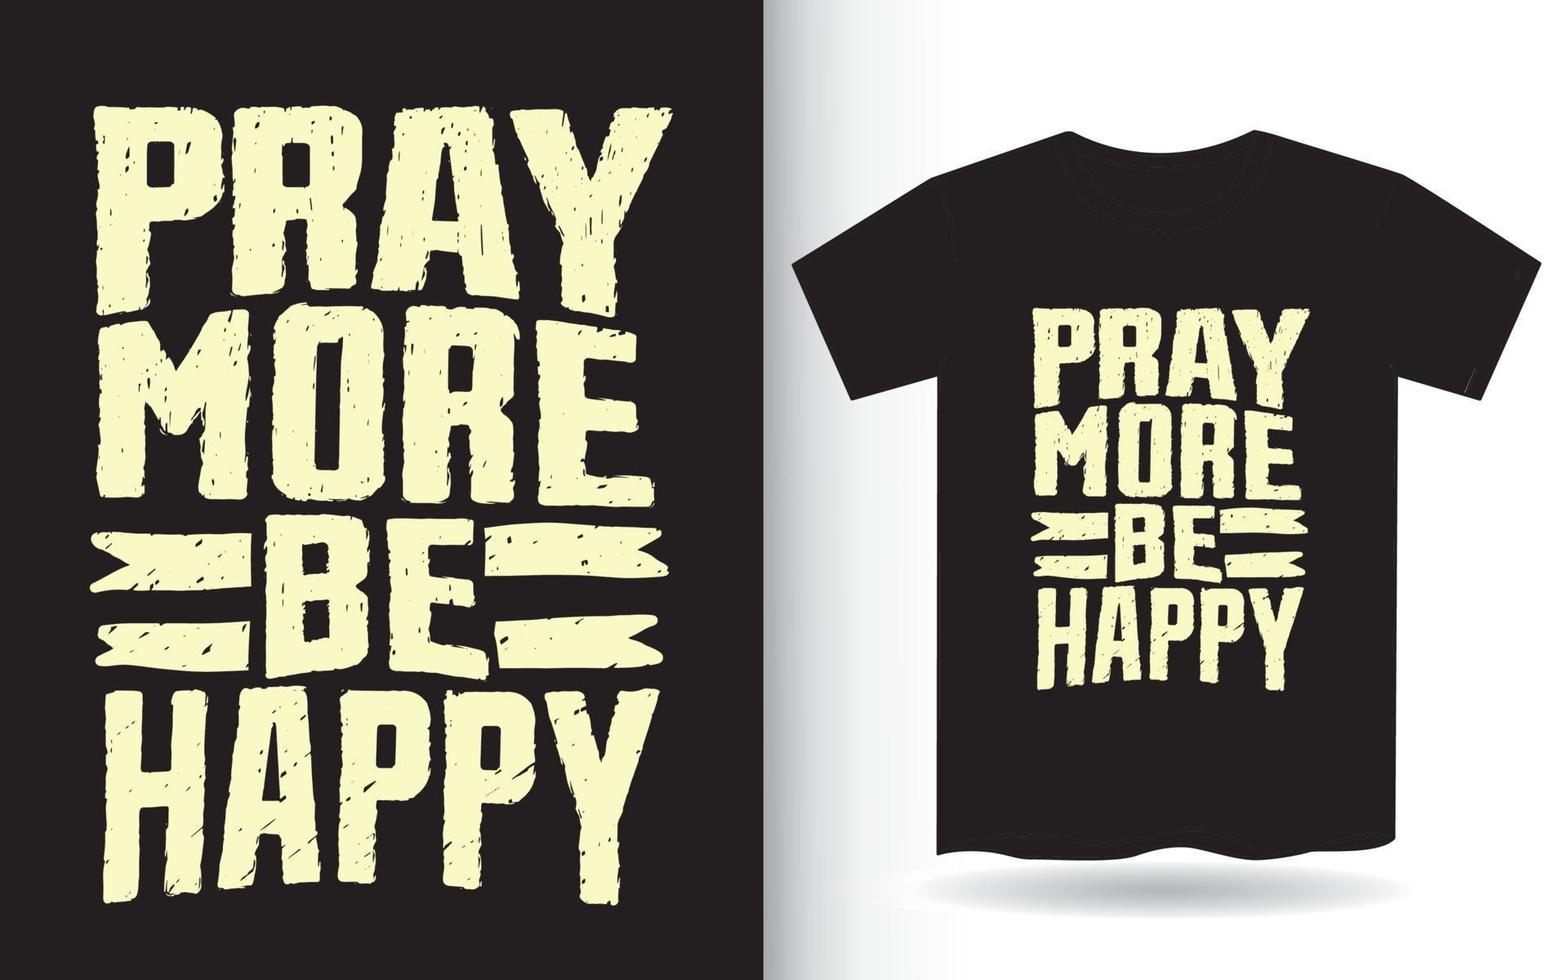 Pray more be happy typography for t shirt vector